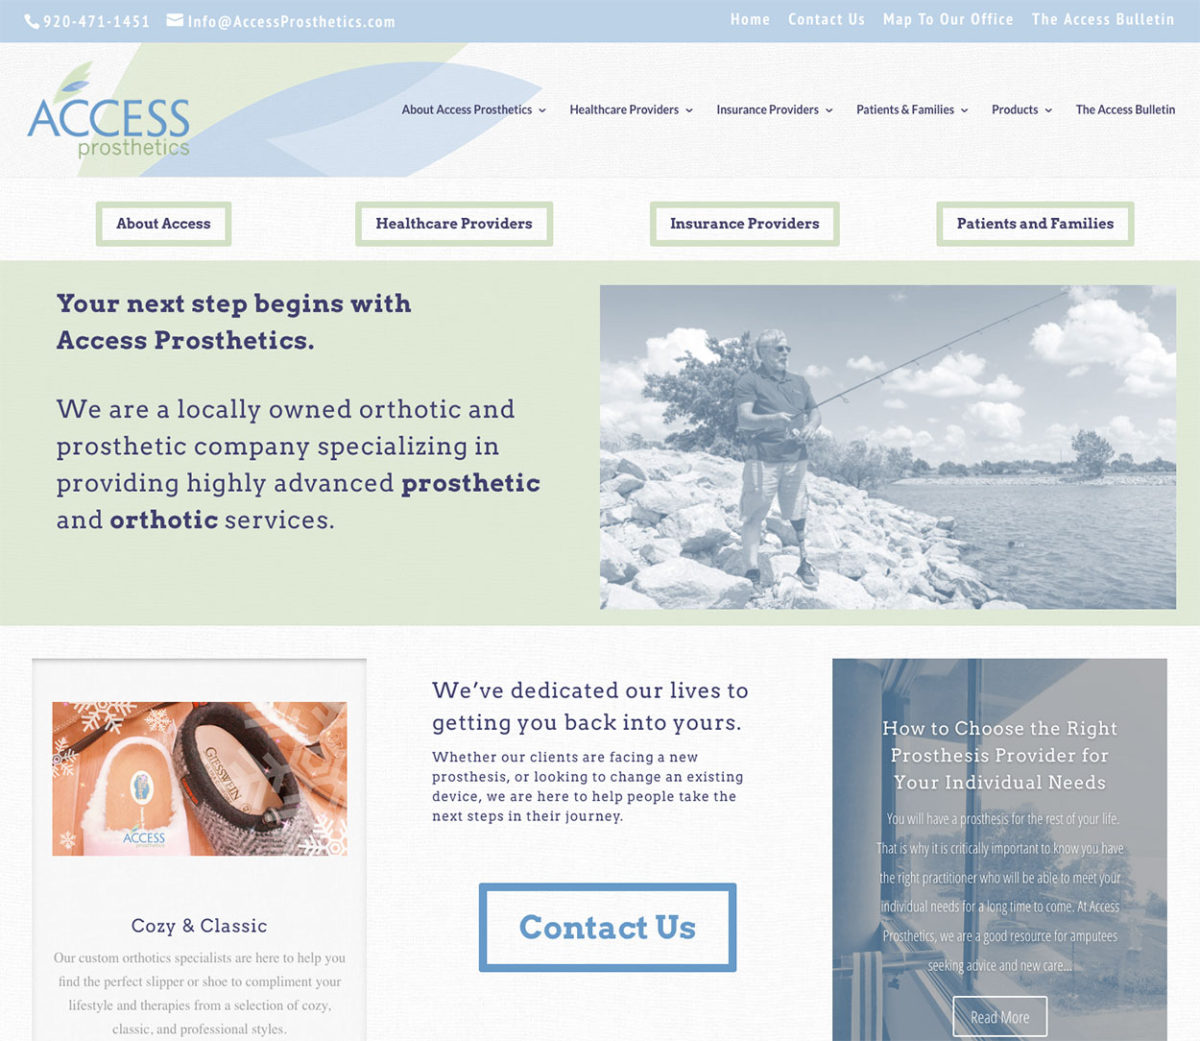 Access Prosthetics,prosthetic company, orthotic services, prosthetic services, website design,wisconsin website desingers,american website development,wi seo companies,green bay website designers,graphic designers in green bay,fox valley,appleton web design